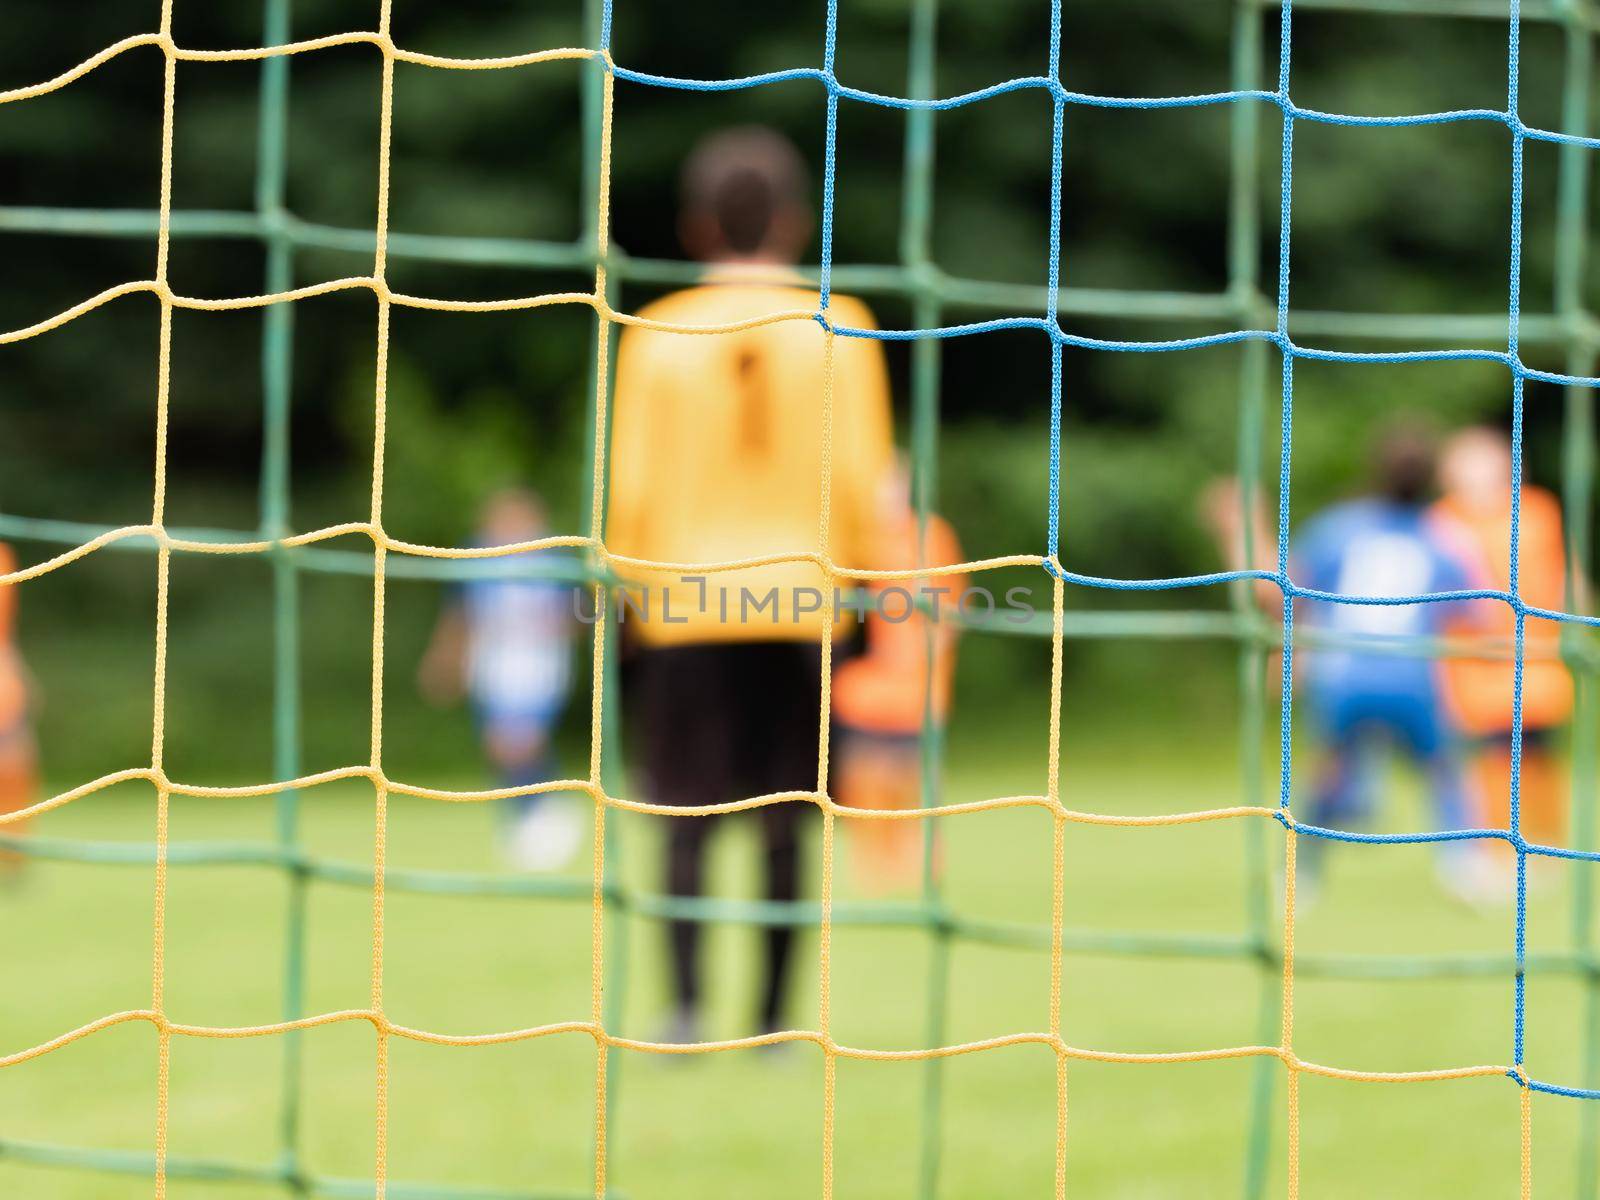 View through soccer gate net. The goalkeeper slowly backs up during the opponents' attack. Abstract view by rdonar2